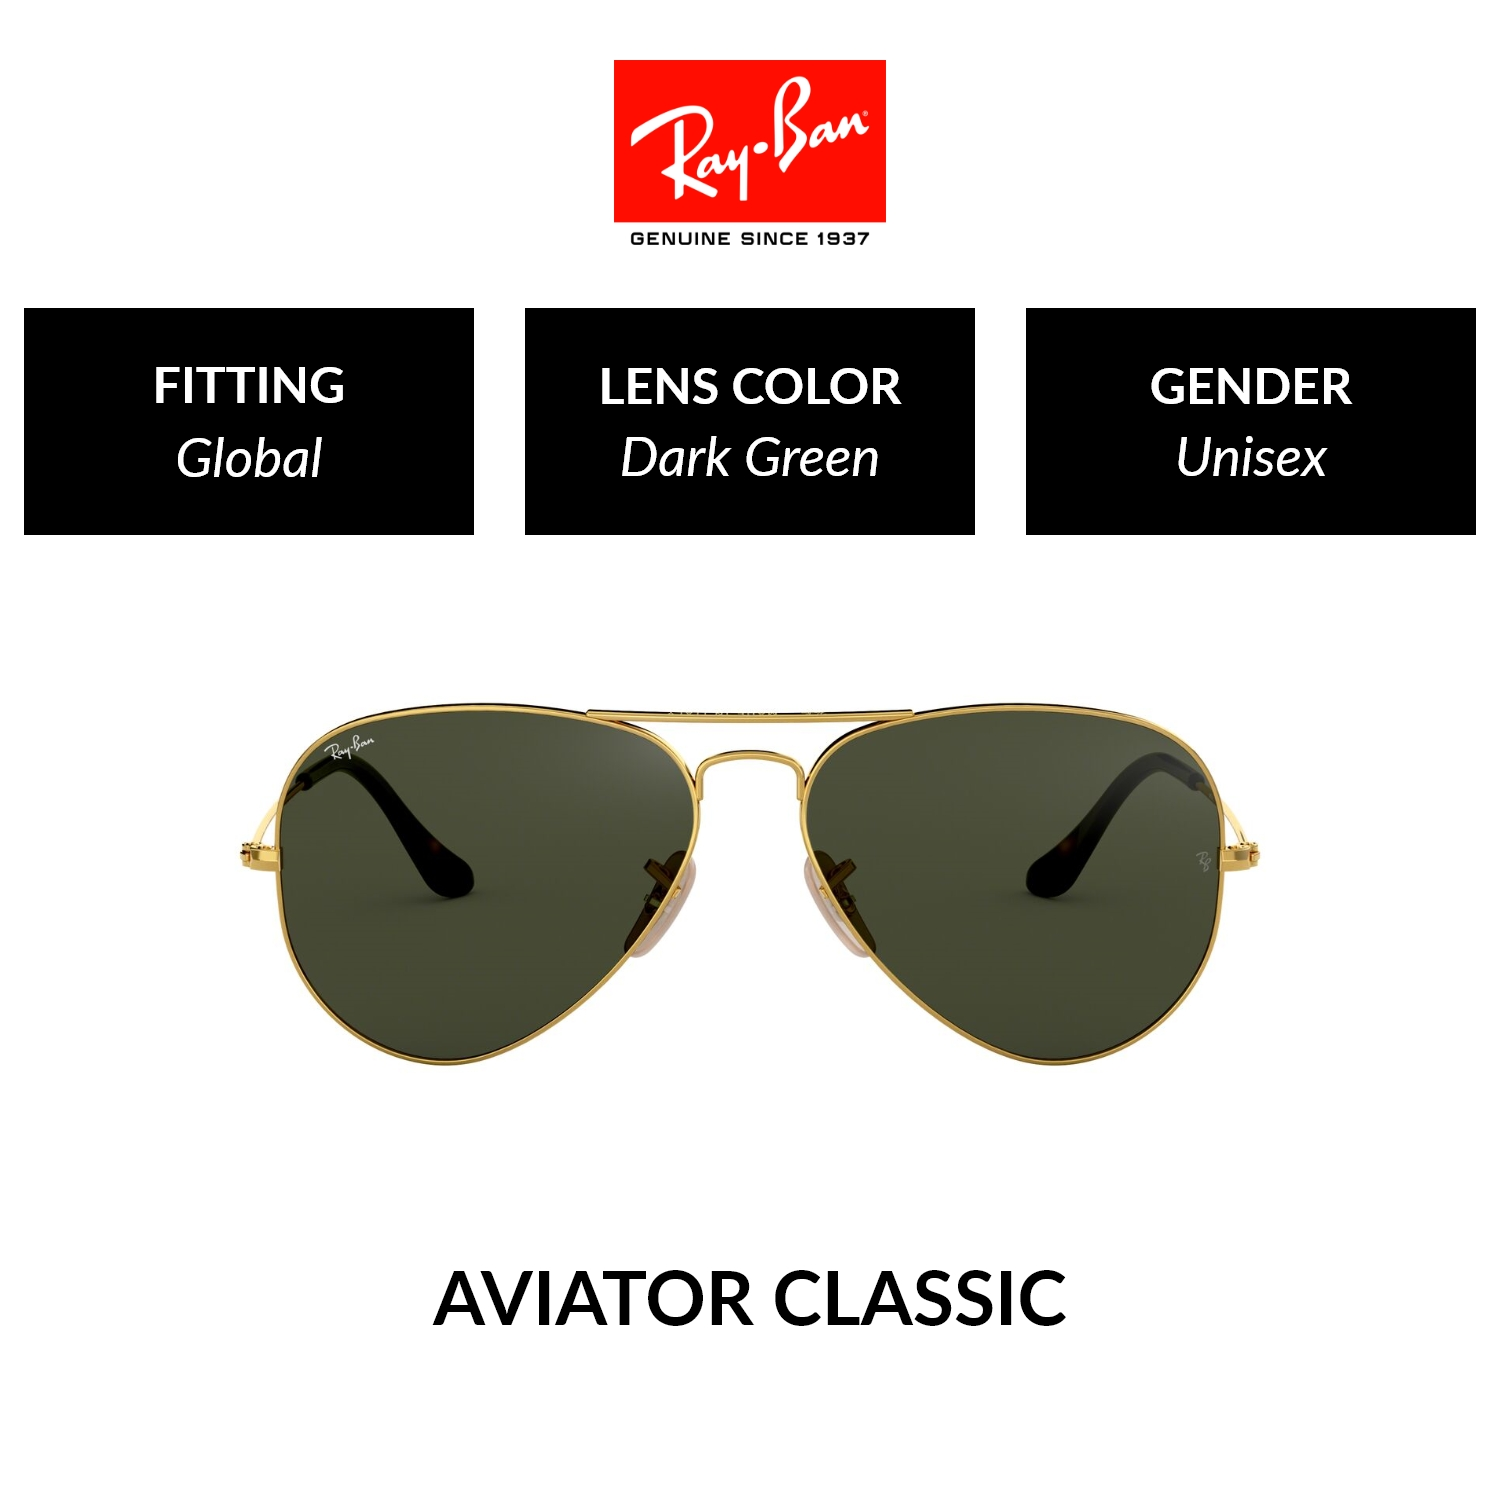 Sunglasses Ray-Ban Aviator Metal Gold G15 RB3025 181 62-14 in